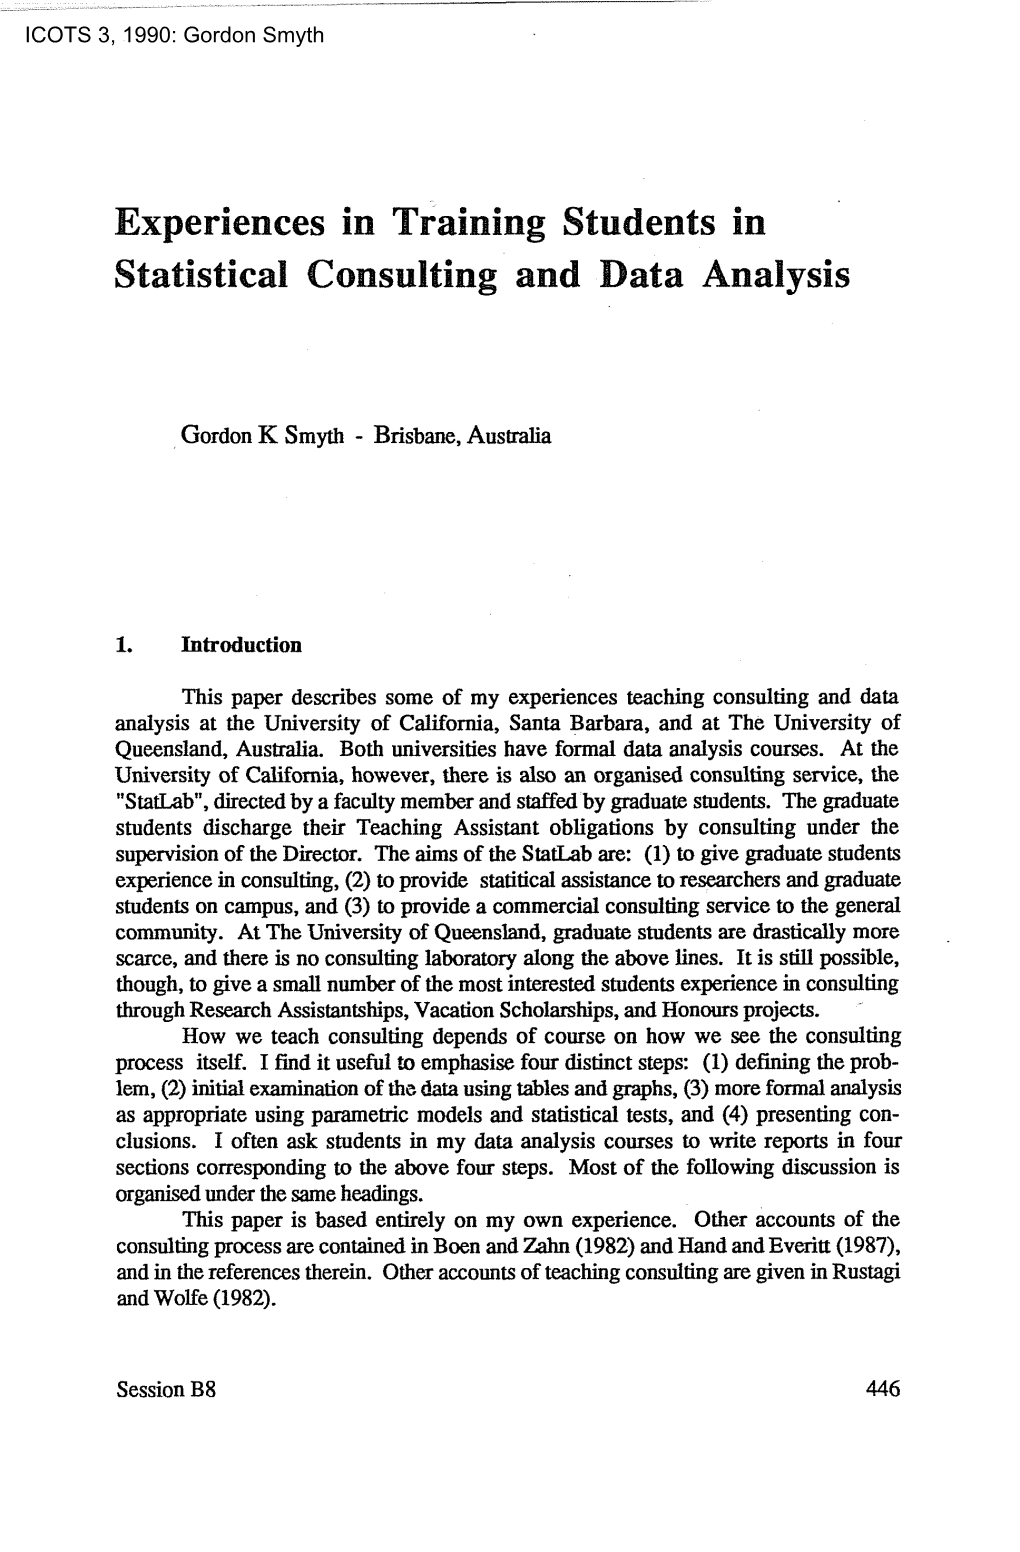 Experiences in Training Students in Statistical Consulting and Data Analysis